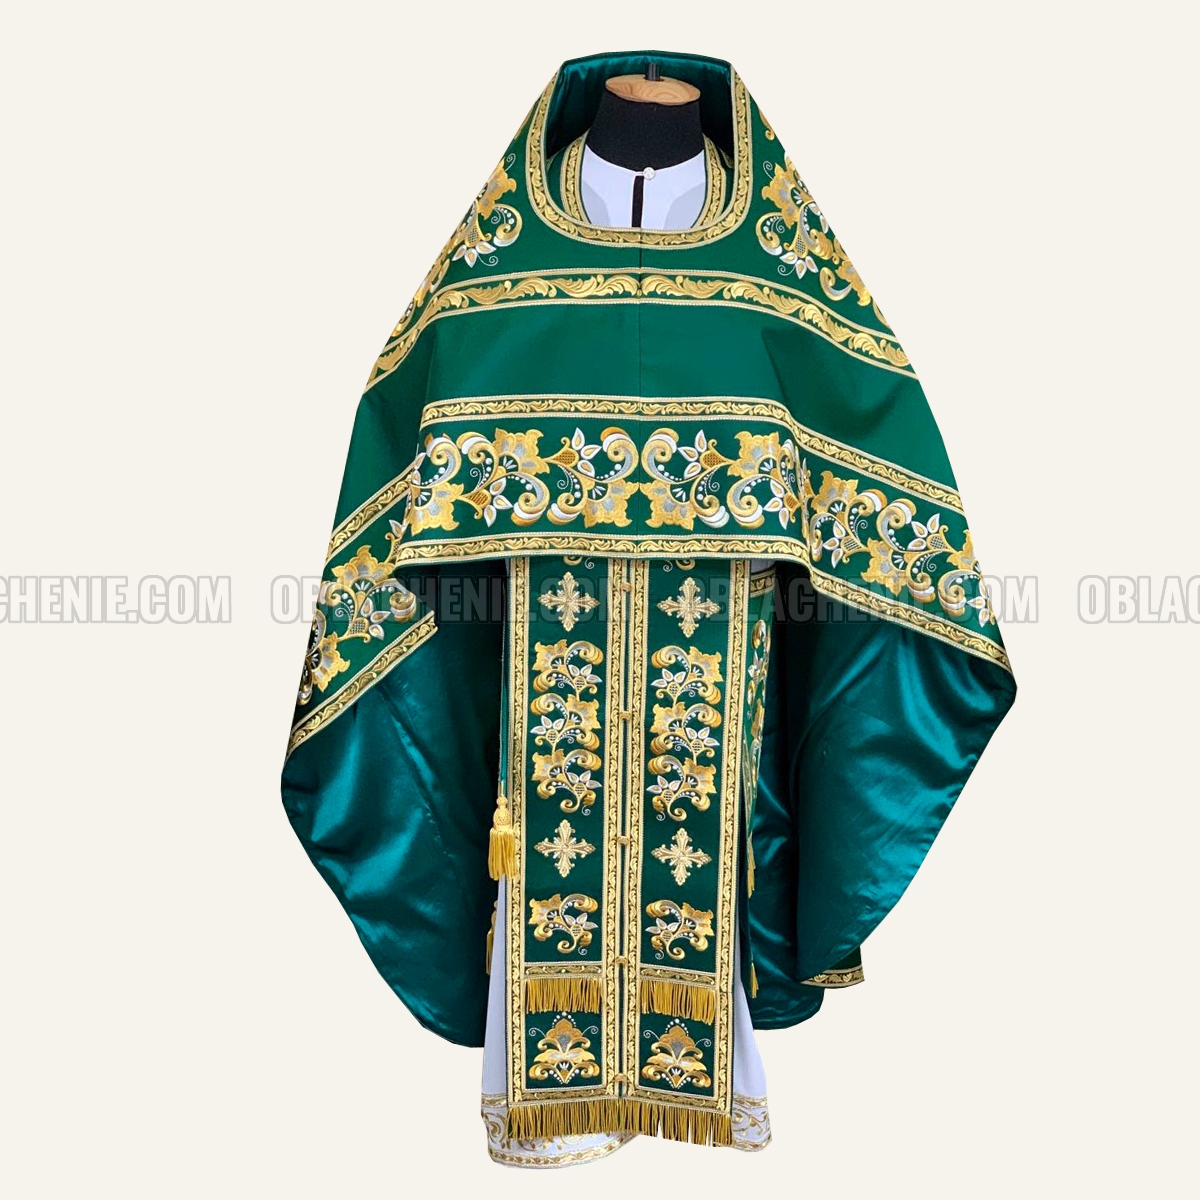 EMBROIDERED PRIEST'S VESTMENTS 10774